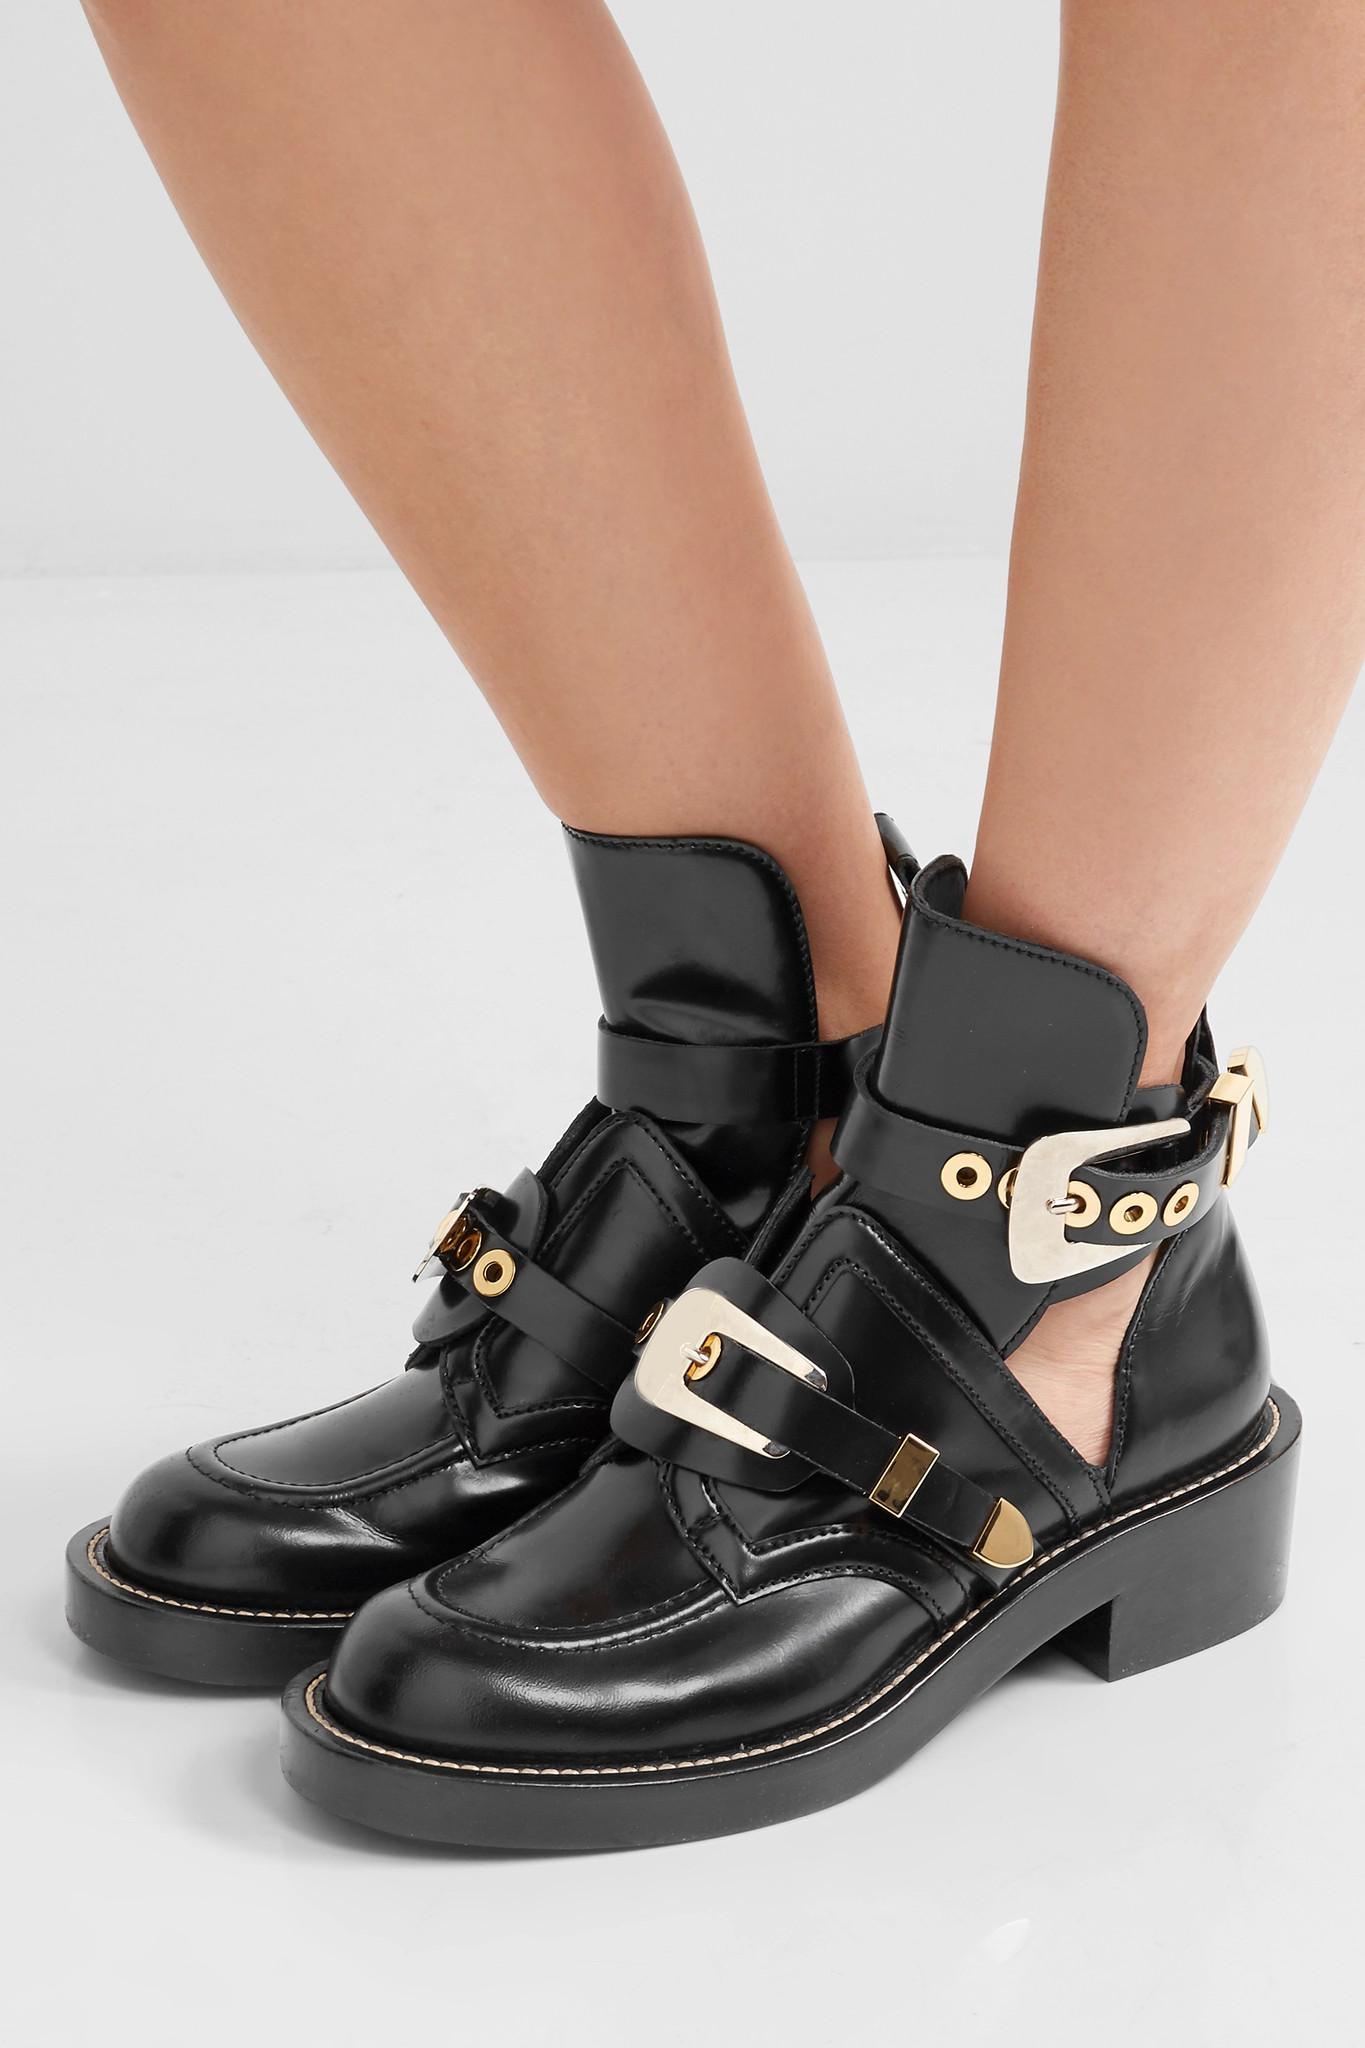 Balenciaga Inspired Cut Out Boots Online Hotsell, UP TO 50% OFF |  www.realliganaval.com